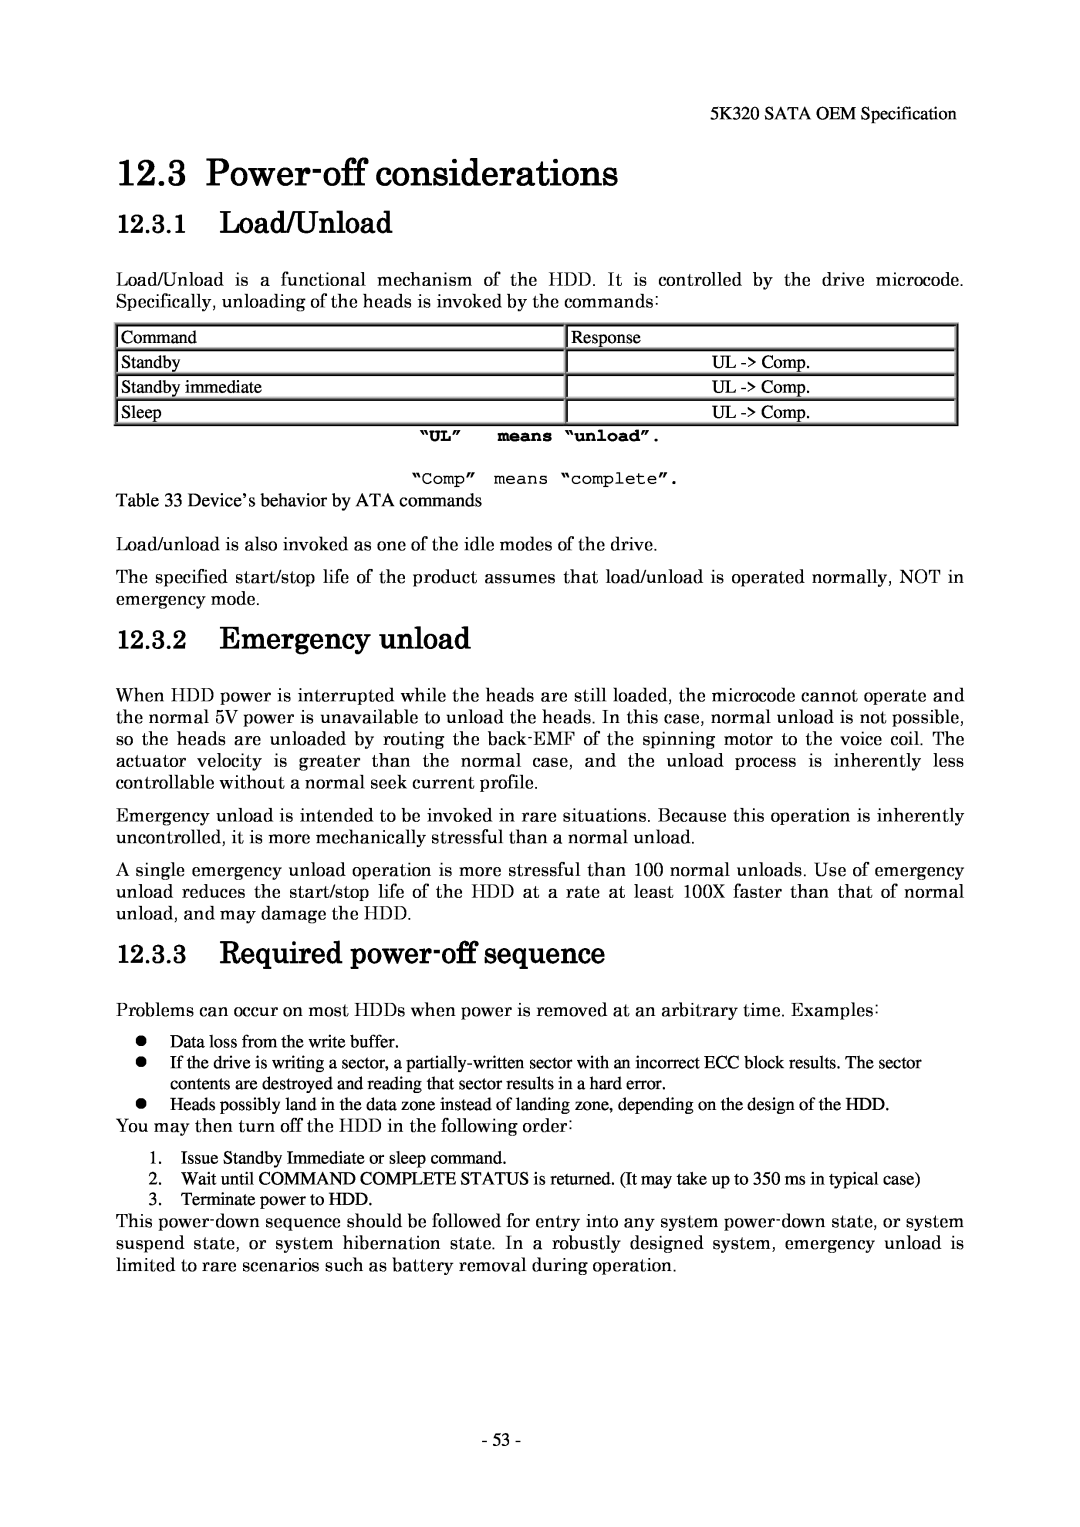 Hitachi HTS543216L9A300 manual Power-offconsiderations, 12.3.1Load/Unload, 12.3.2Emergency unload, “Ul”, means “unload” 